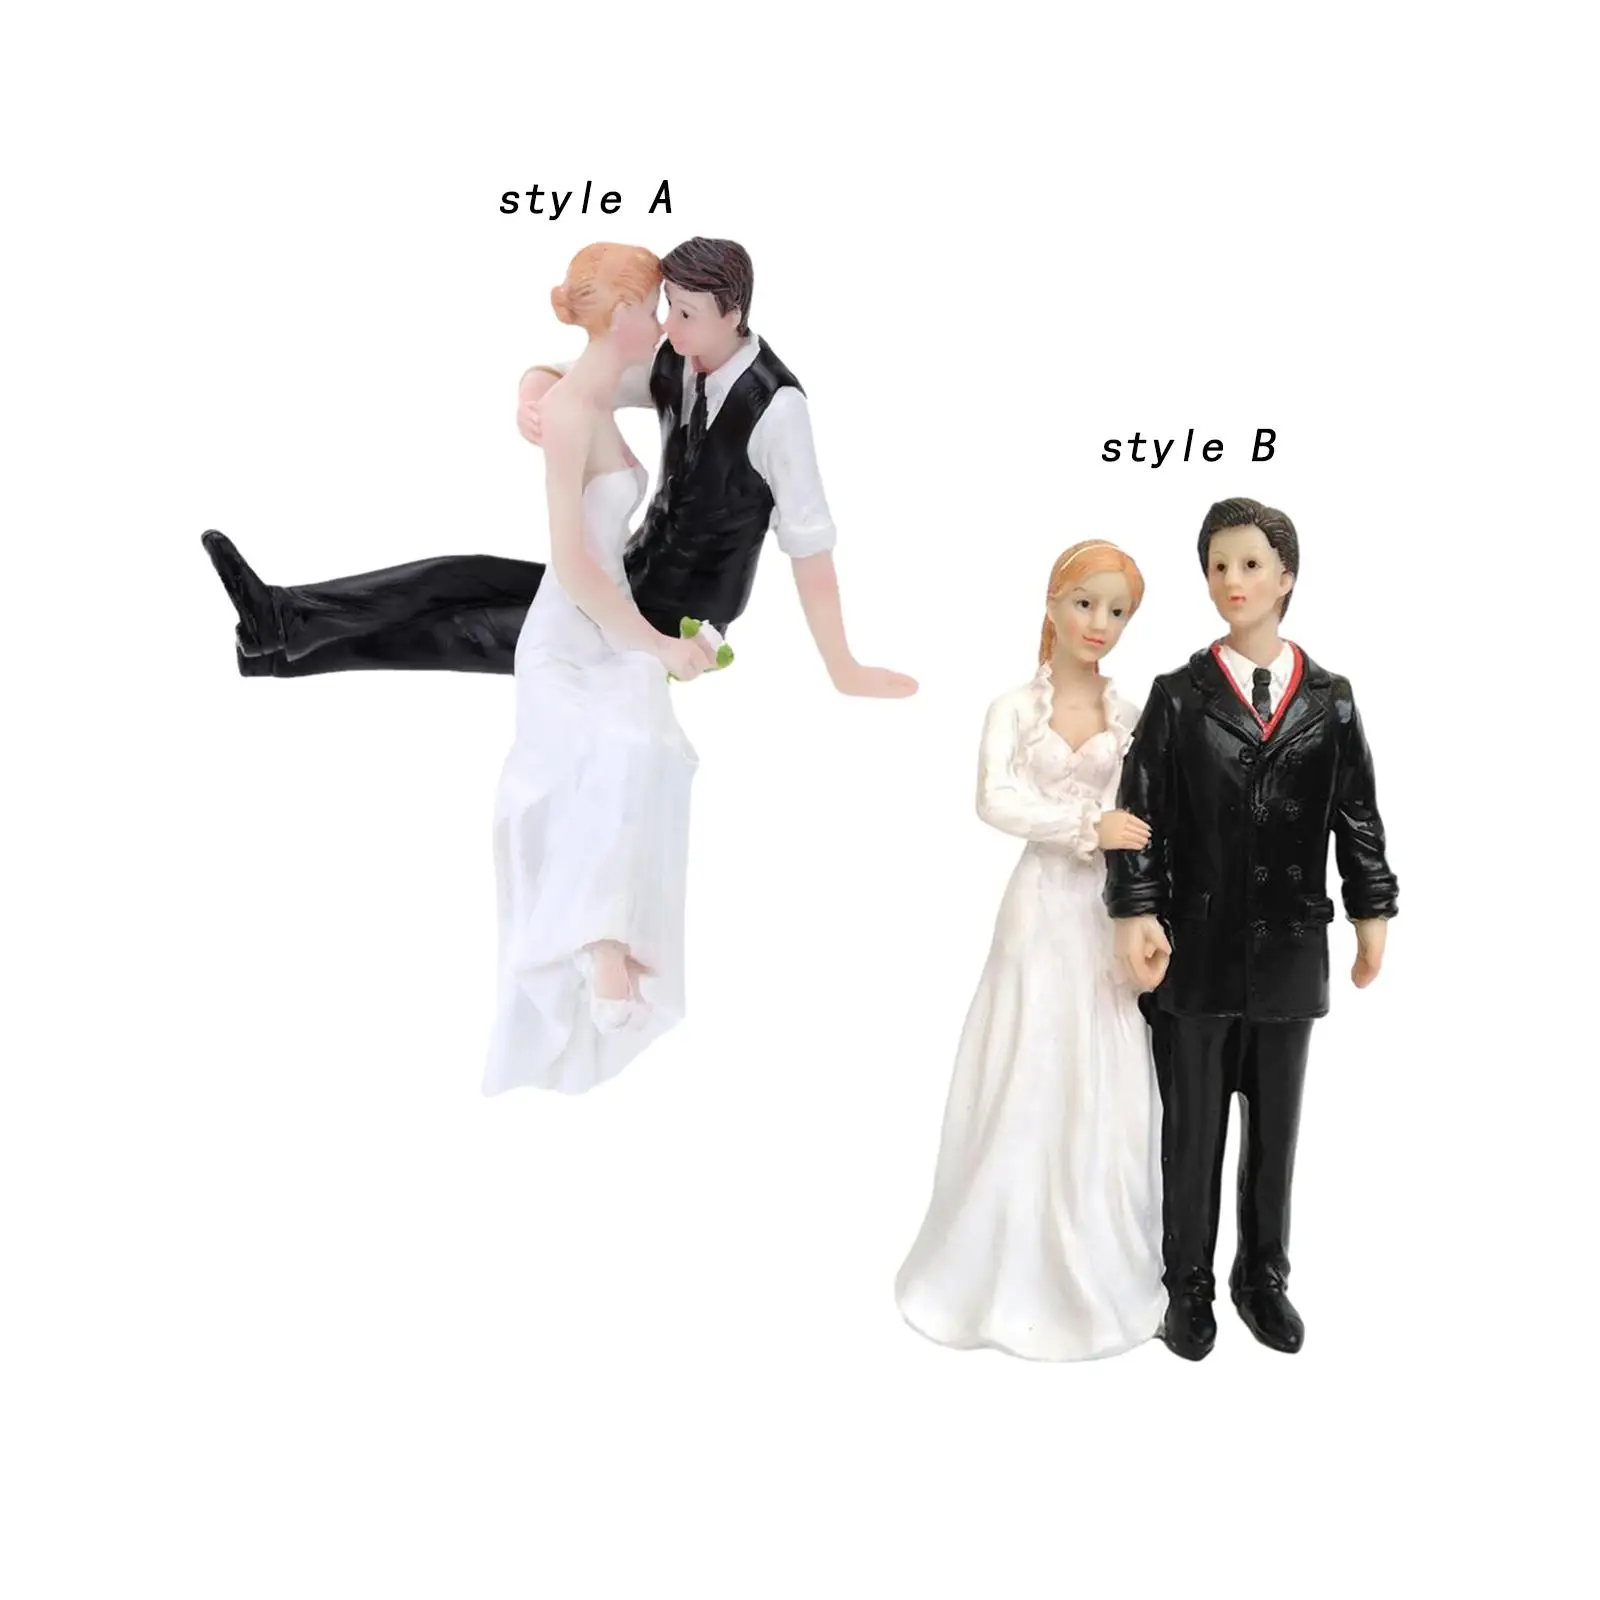 Rustic Cake Topper Bride and Groom Figurines for Anniversary Bridal Showers